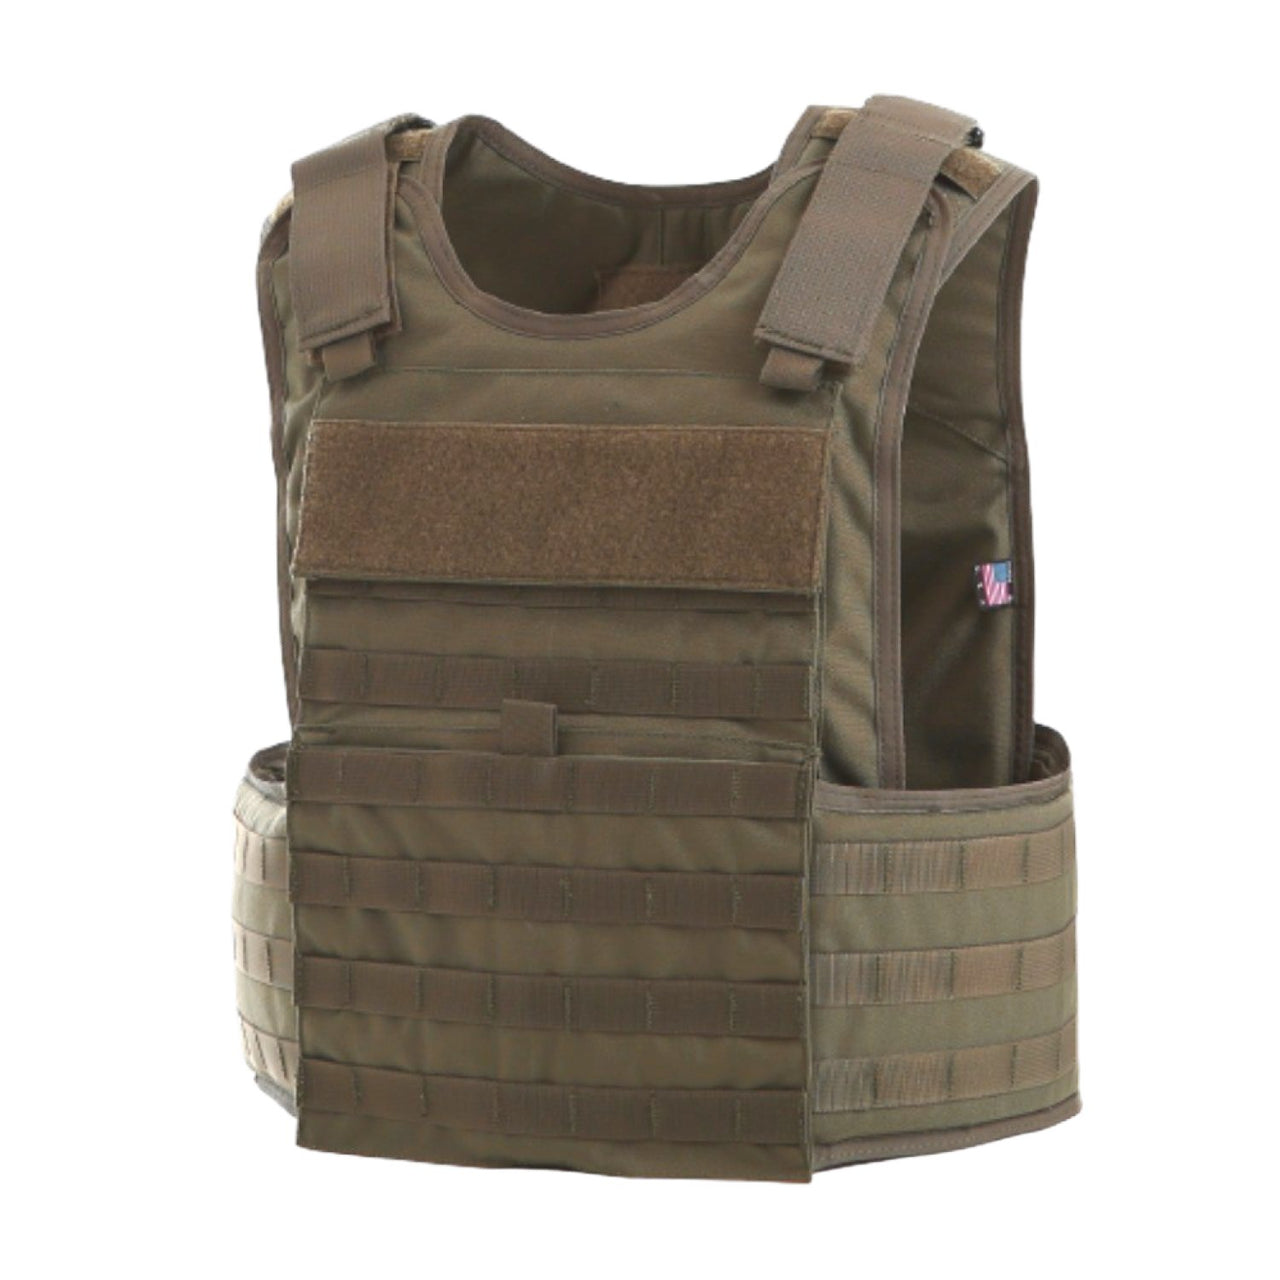 Olive green Body Armor Direct Patriot Tactical Carrier featuring multiple pouches, adjustable shoulders, and Velcro panels, isolated on a white background.